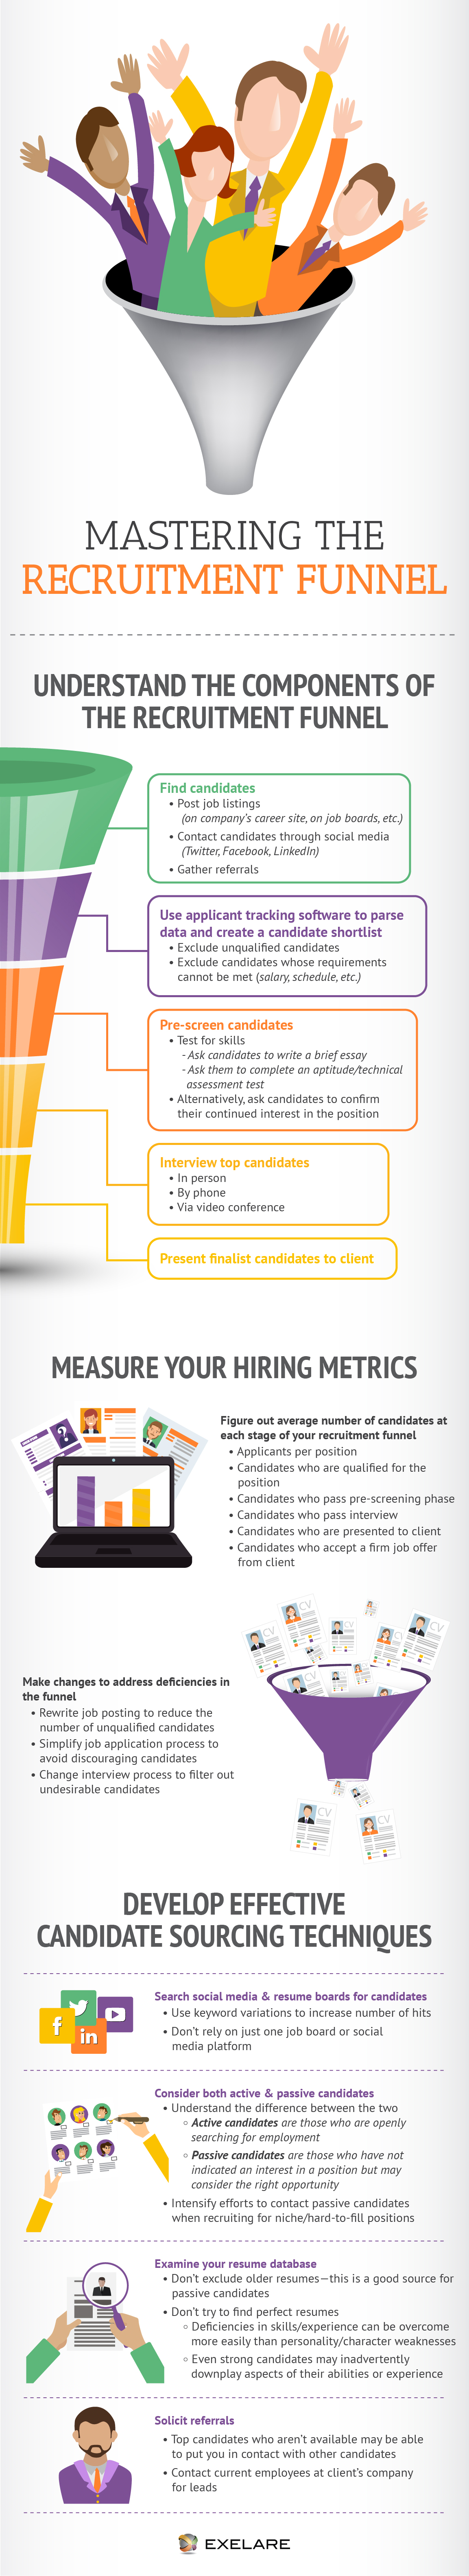 infographic-mastering-the-recruitment-funnel